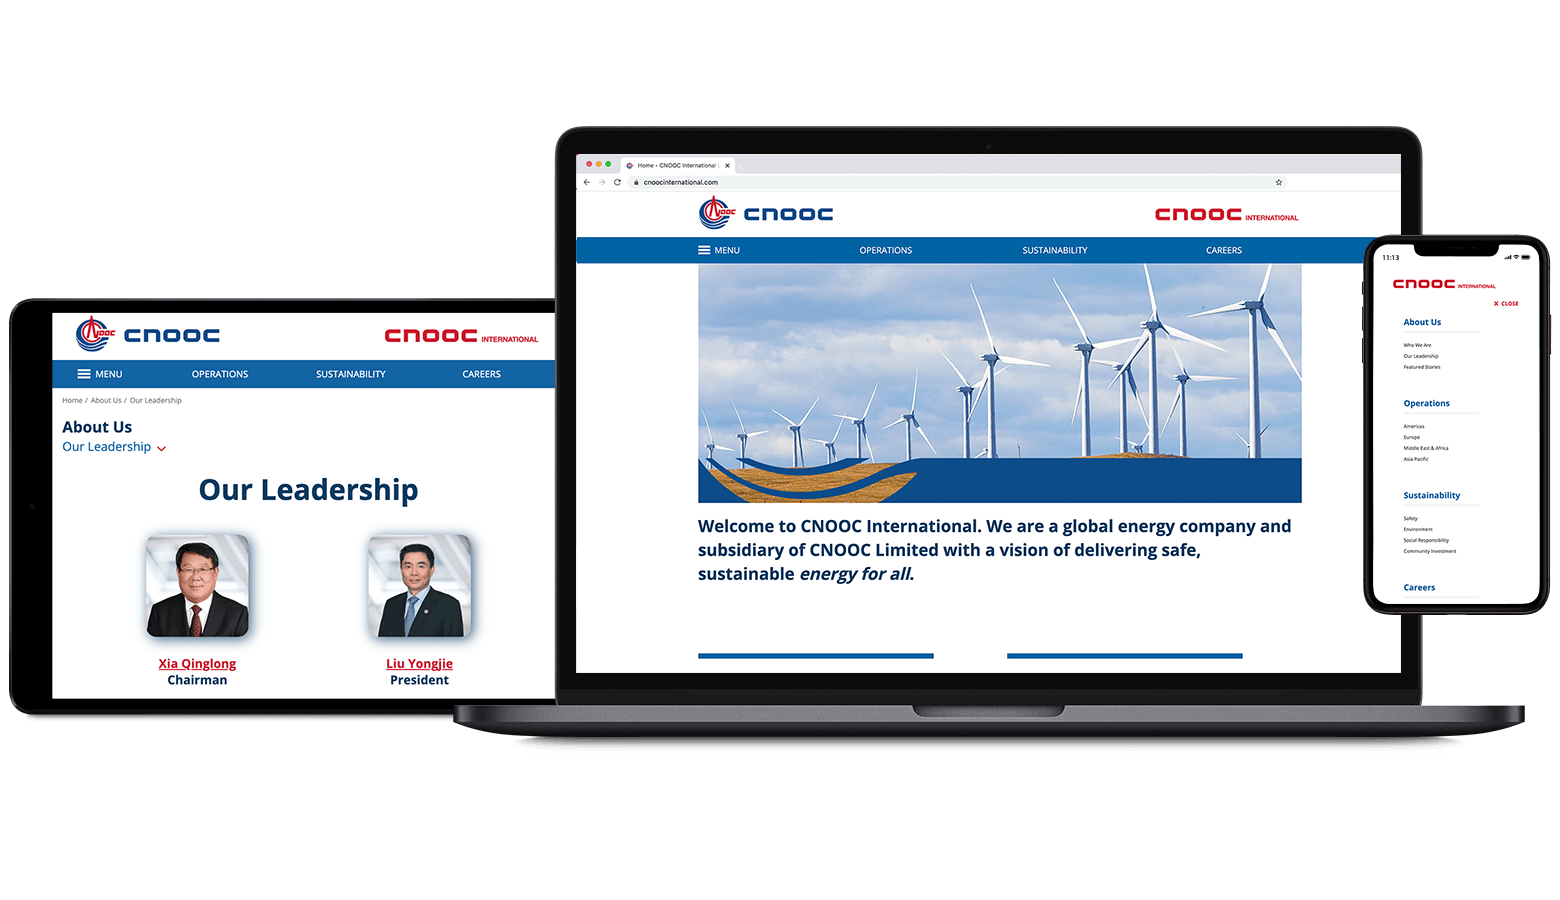 Screenshots of the CNOOC website on multiple devices